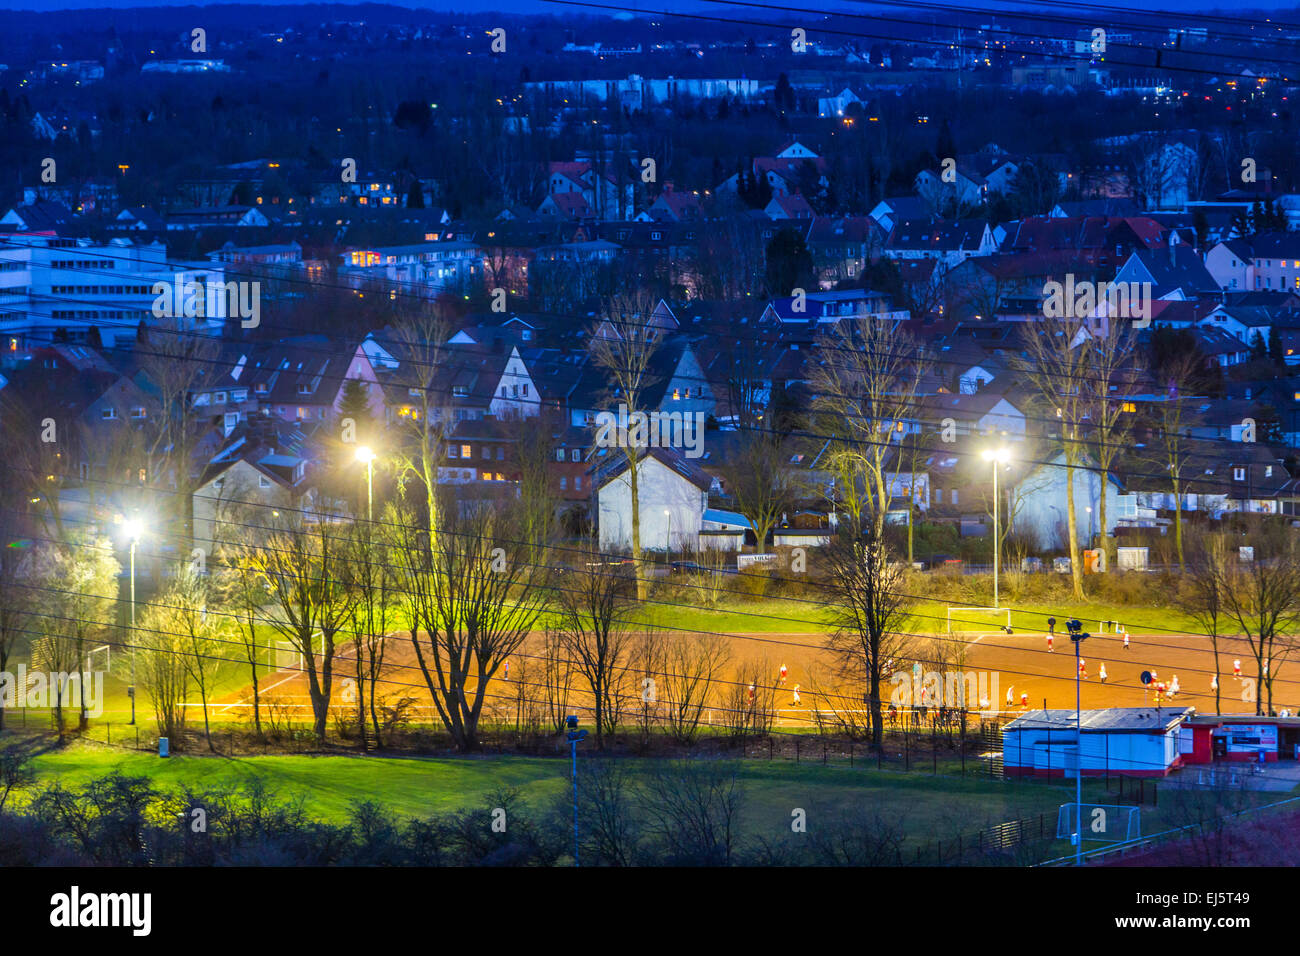 Local sports ground, illuminated in the evening Stock Photo